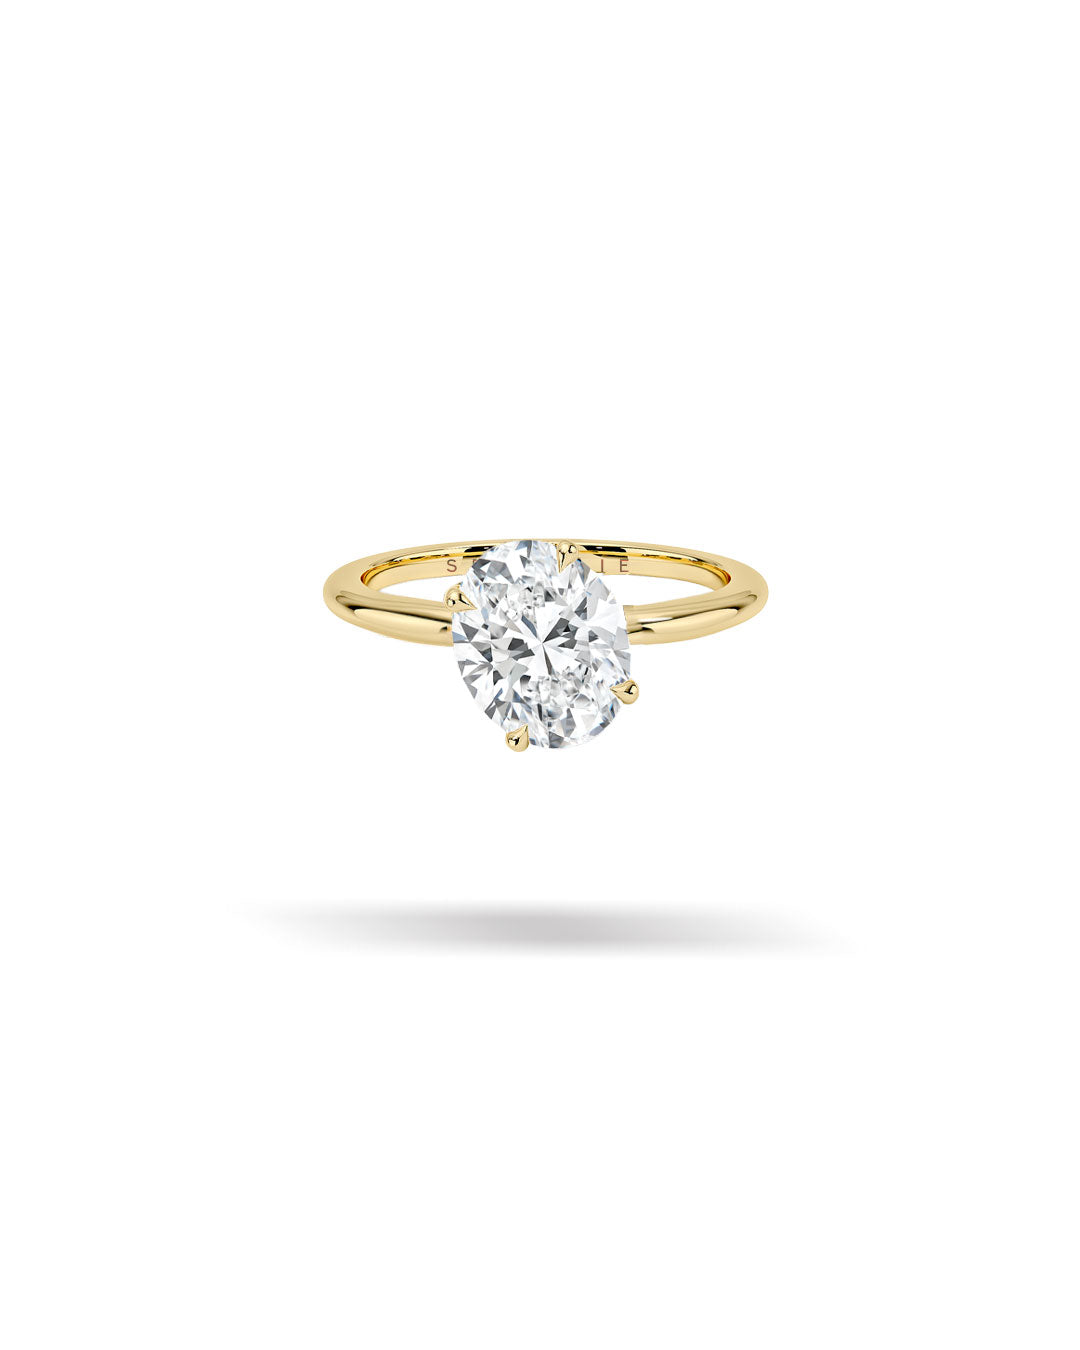 Slanted Oval Solitaire Diamond Ring